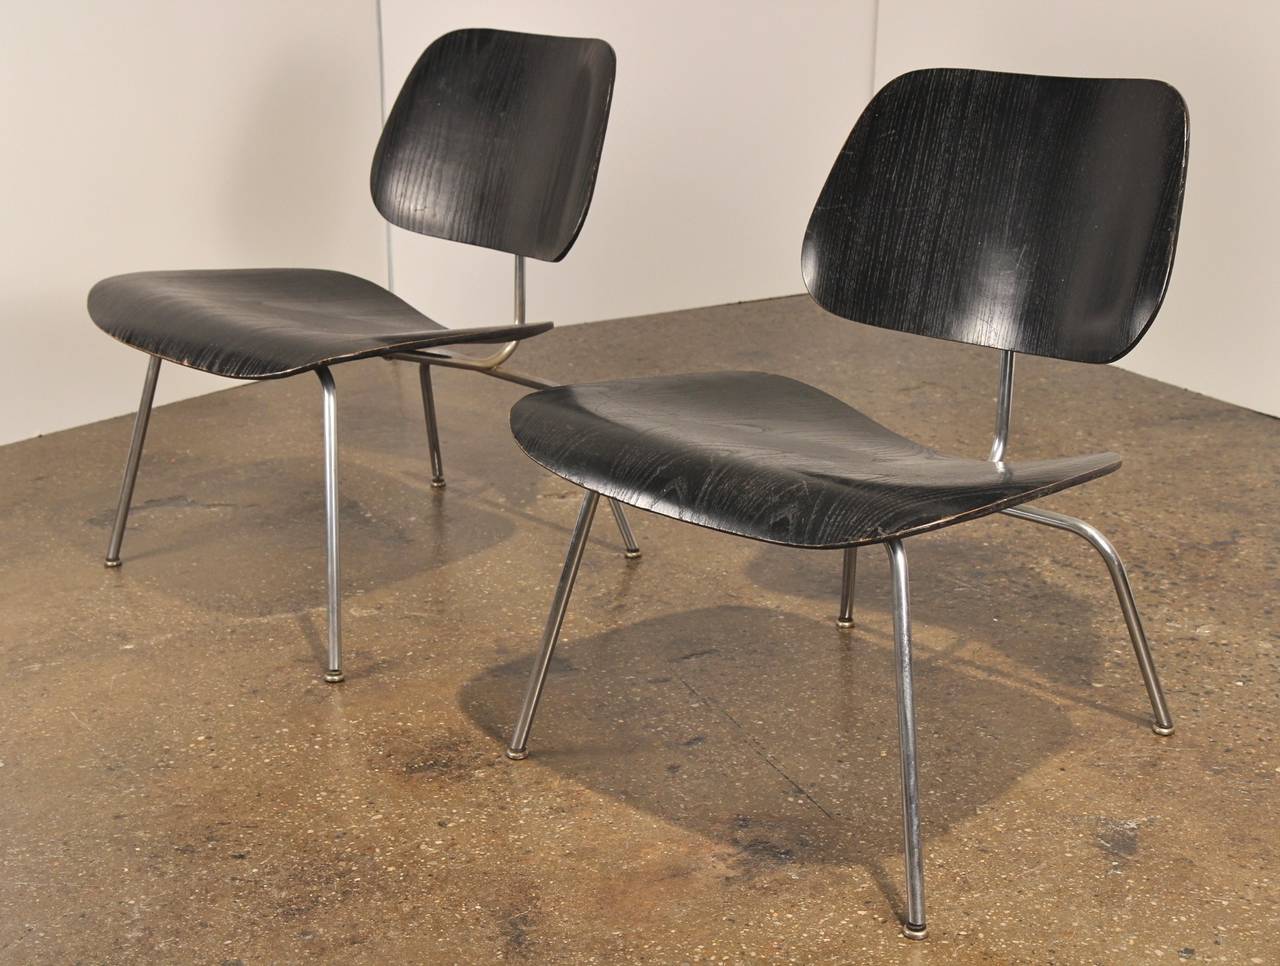 A vintage pair of ebonized lounge chair metal designed by Charles and Ray Eames for Herman Miller in the 1940s. These lovely chairs date to the 1950s and are in excellent condition. The plywood has a beautiful patina and the shockmounts are in good